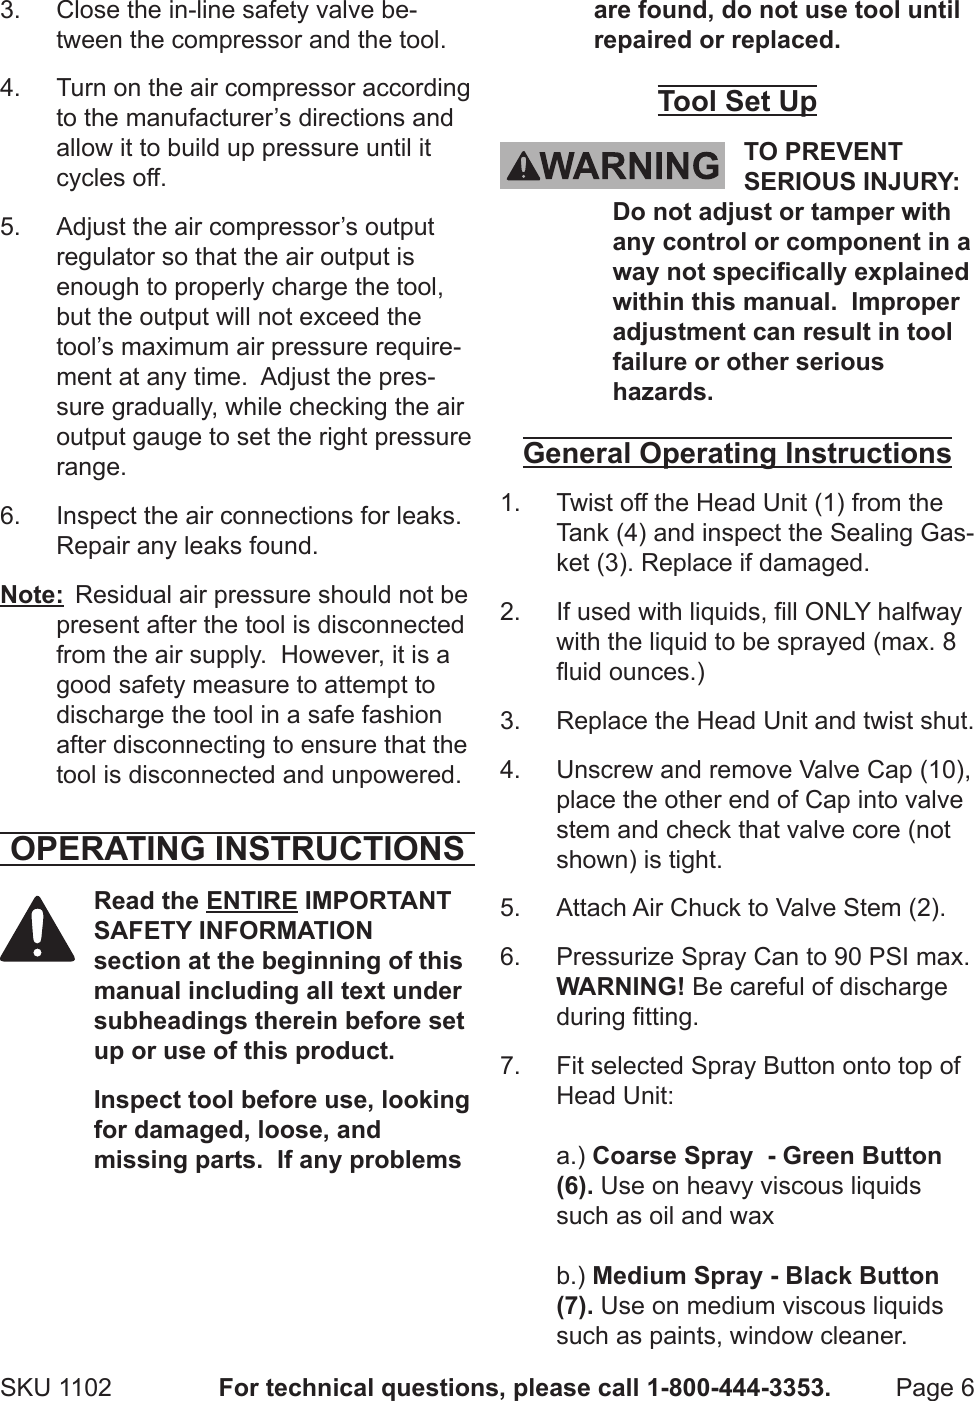 Page 6 of 10 - Harbor-Freight Harbor-Freight-1102-Users-Manual-  Harbor-freight-1102-users-manual